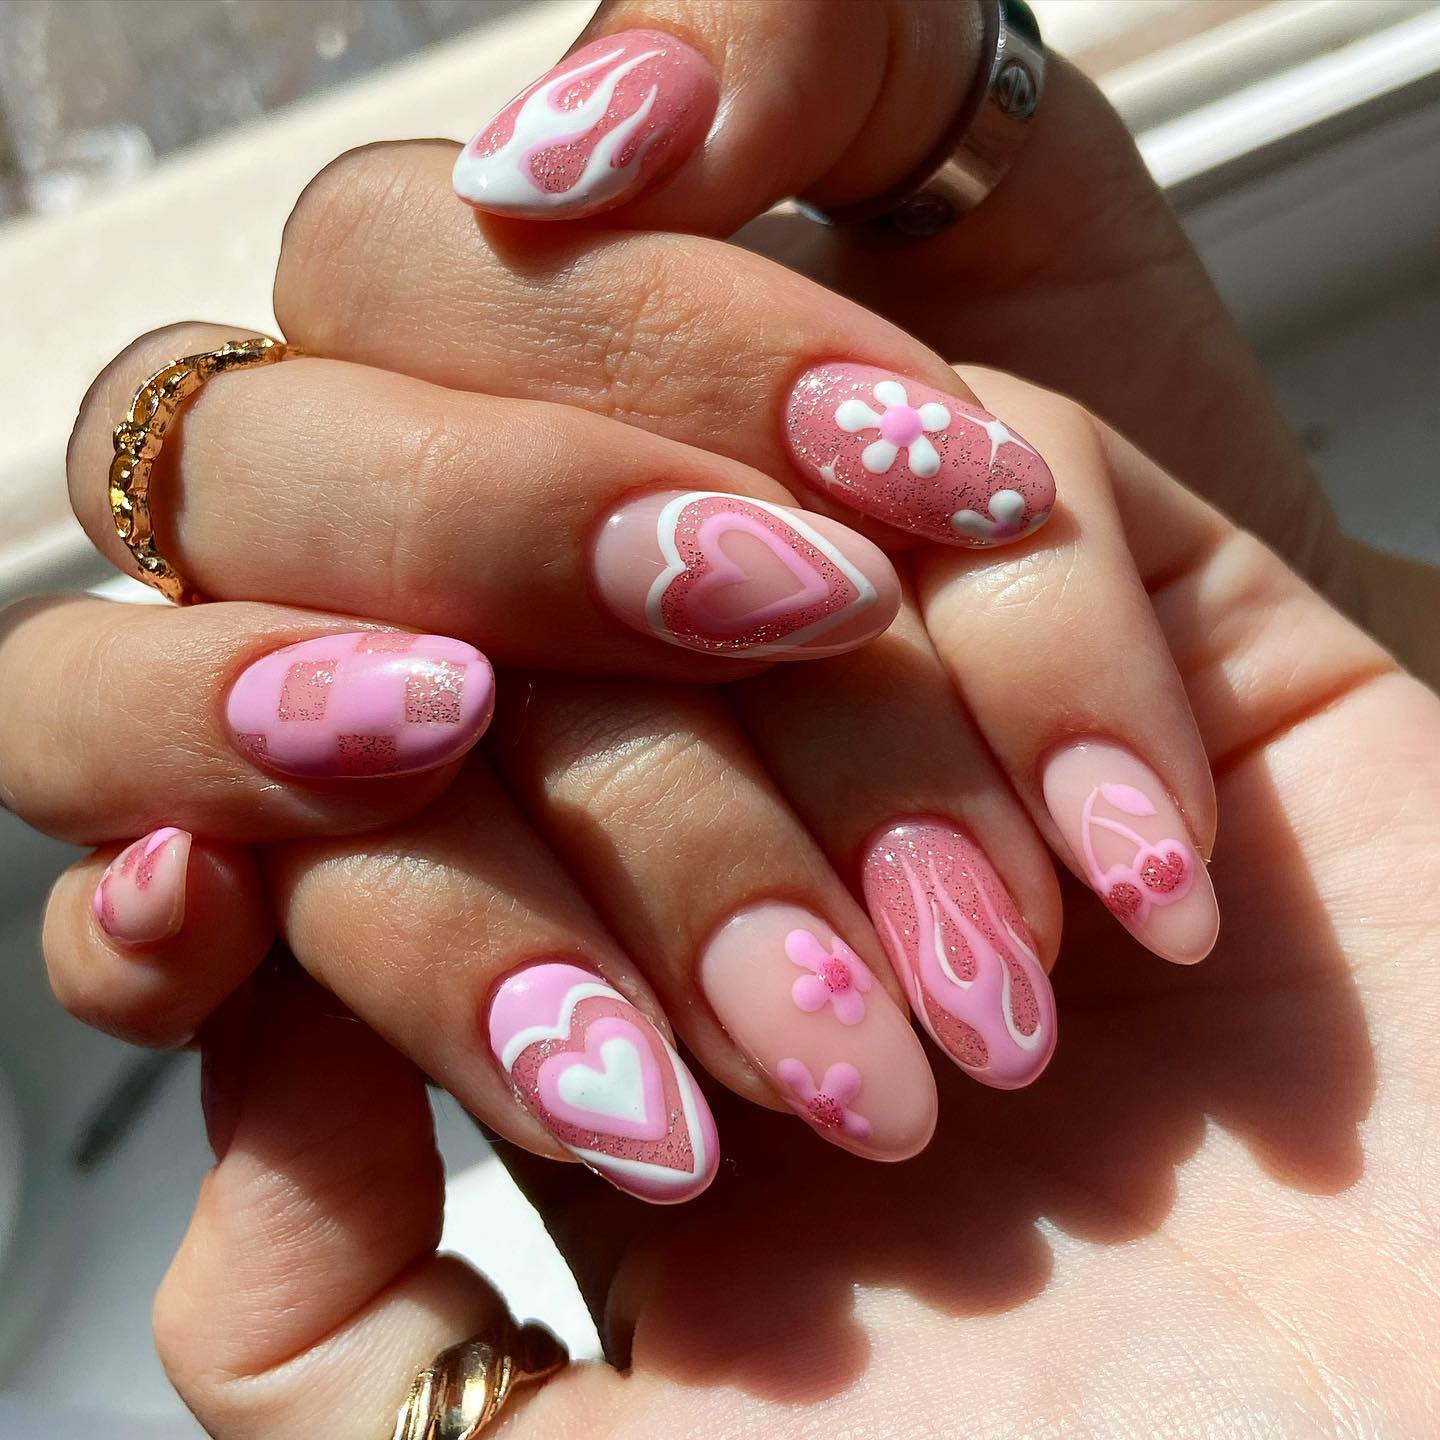 Light pink manicure with white heart design